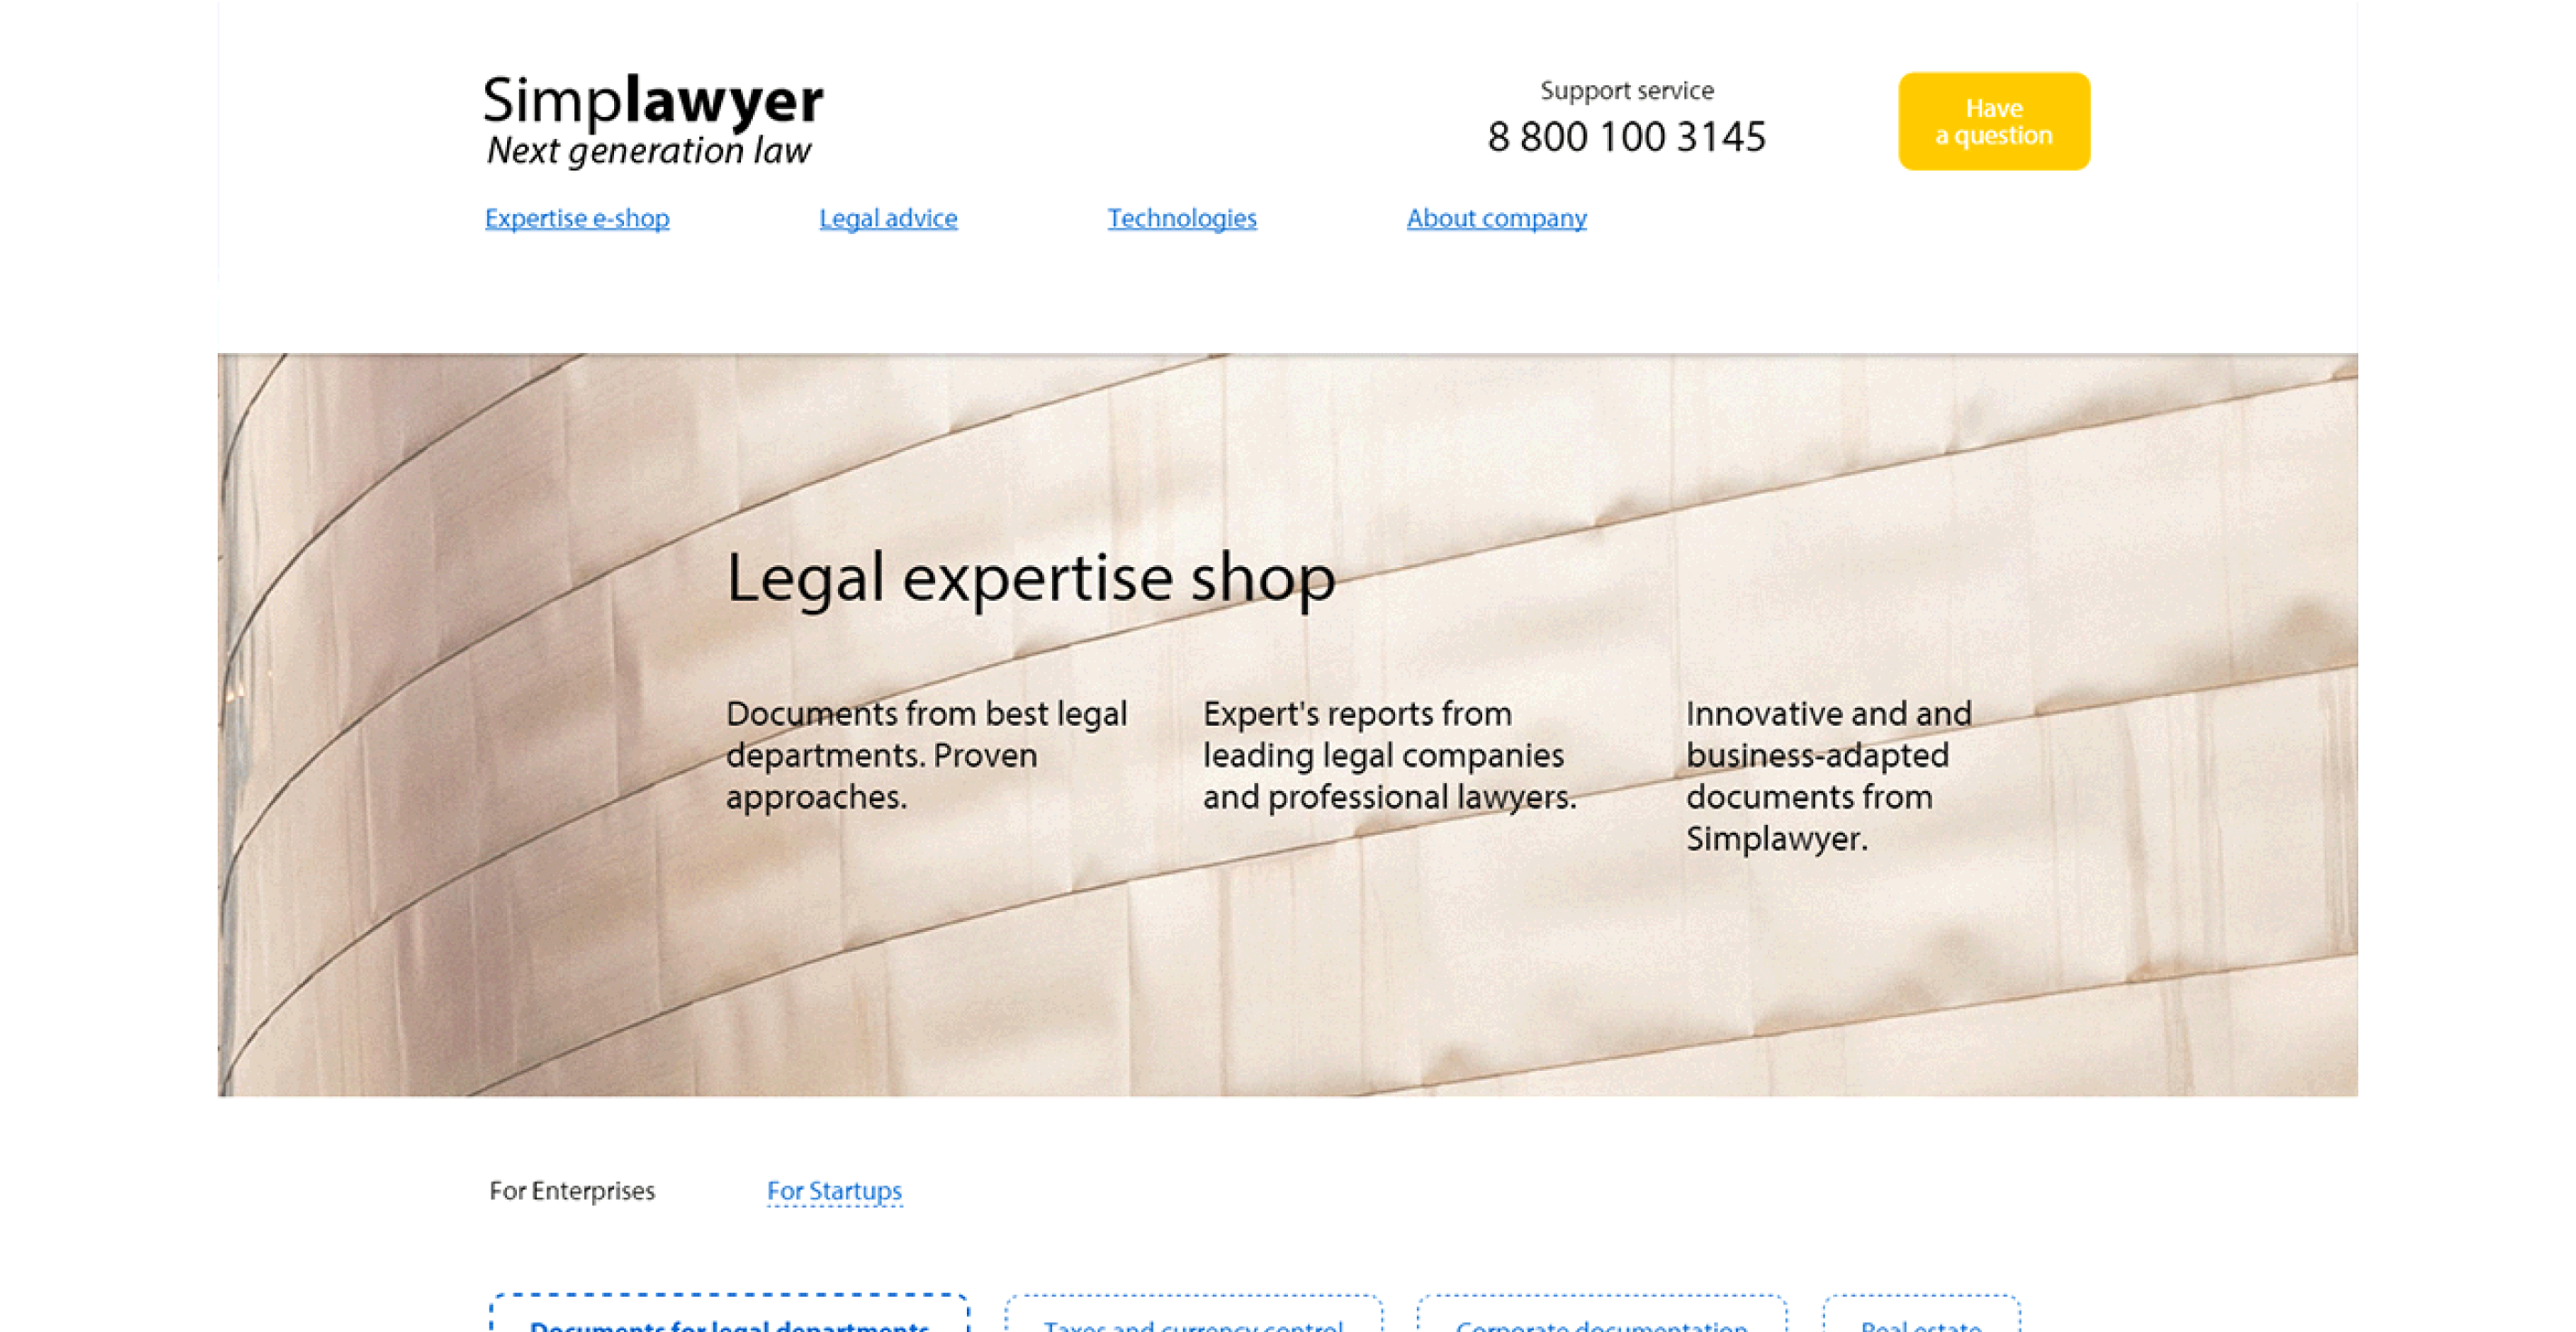 A webpage about legal expertise shop